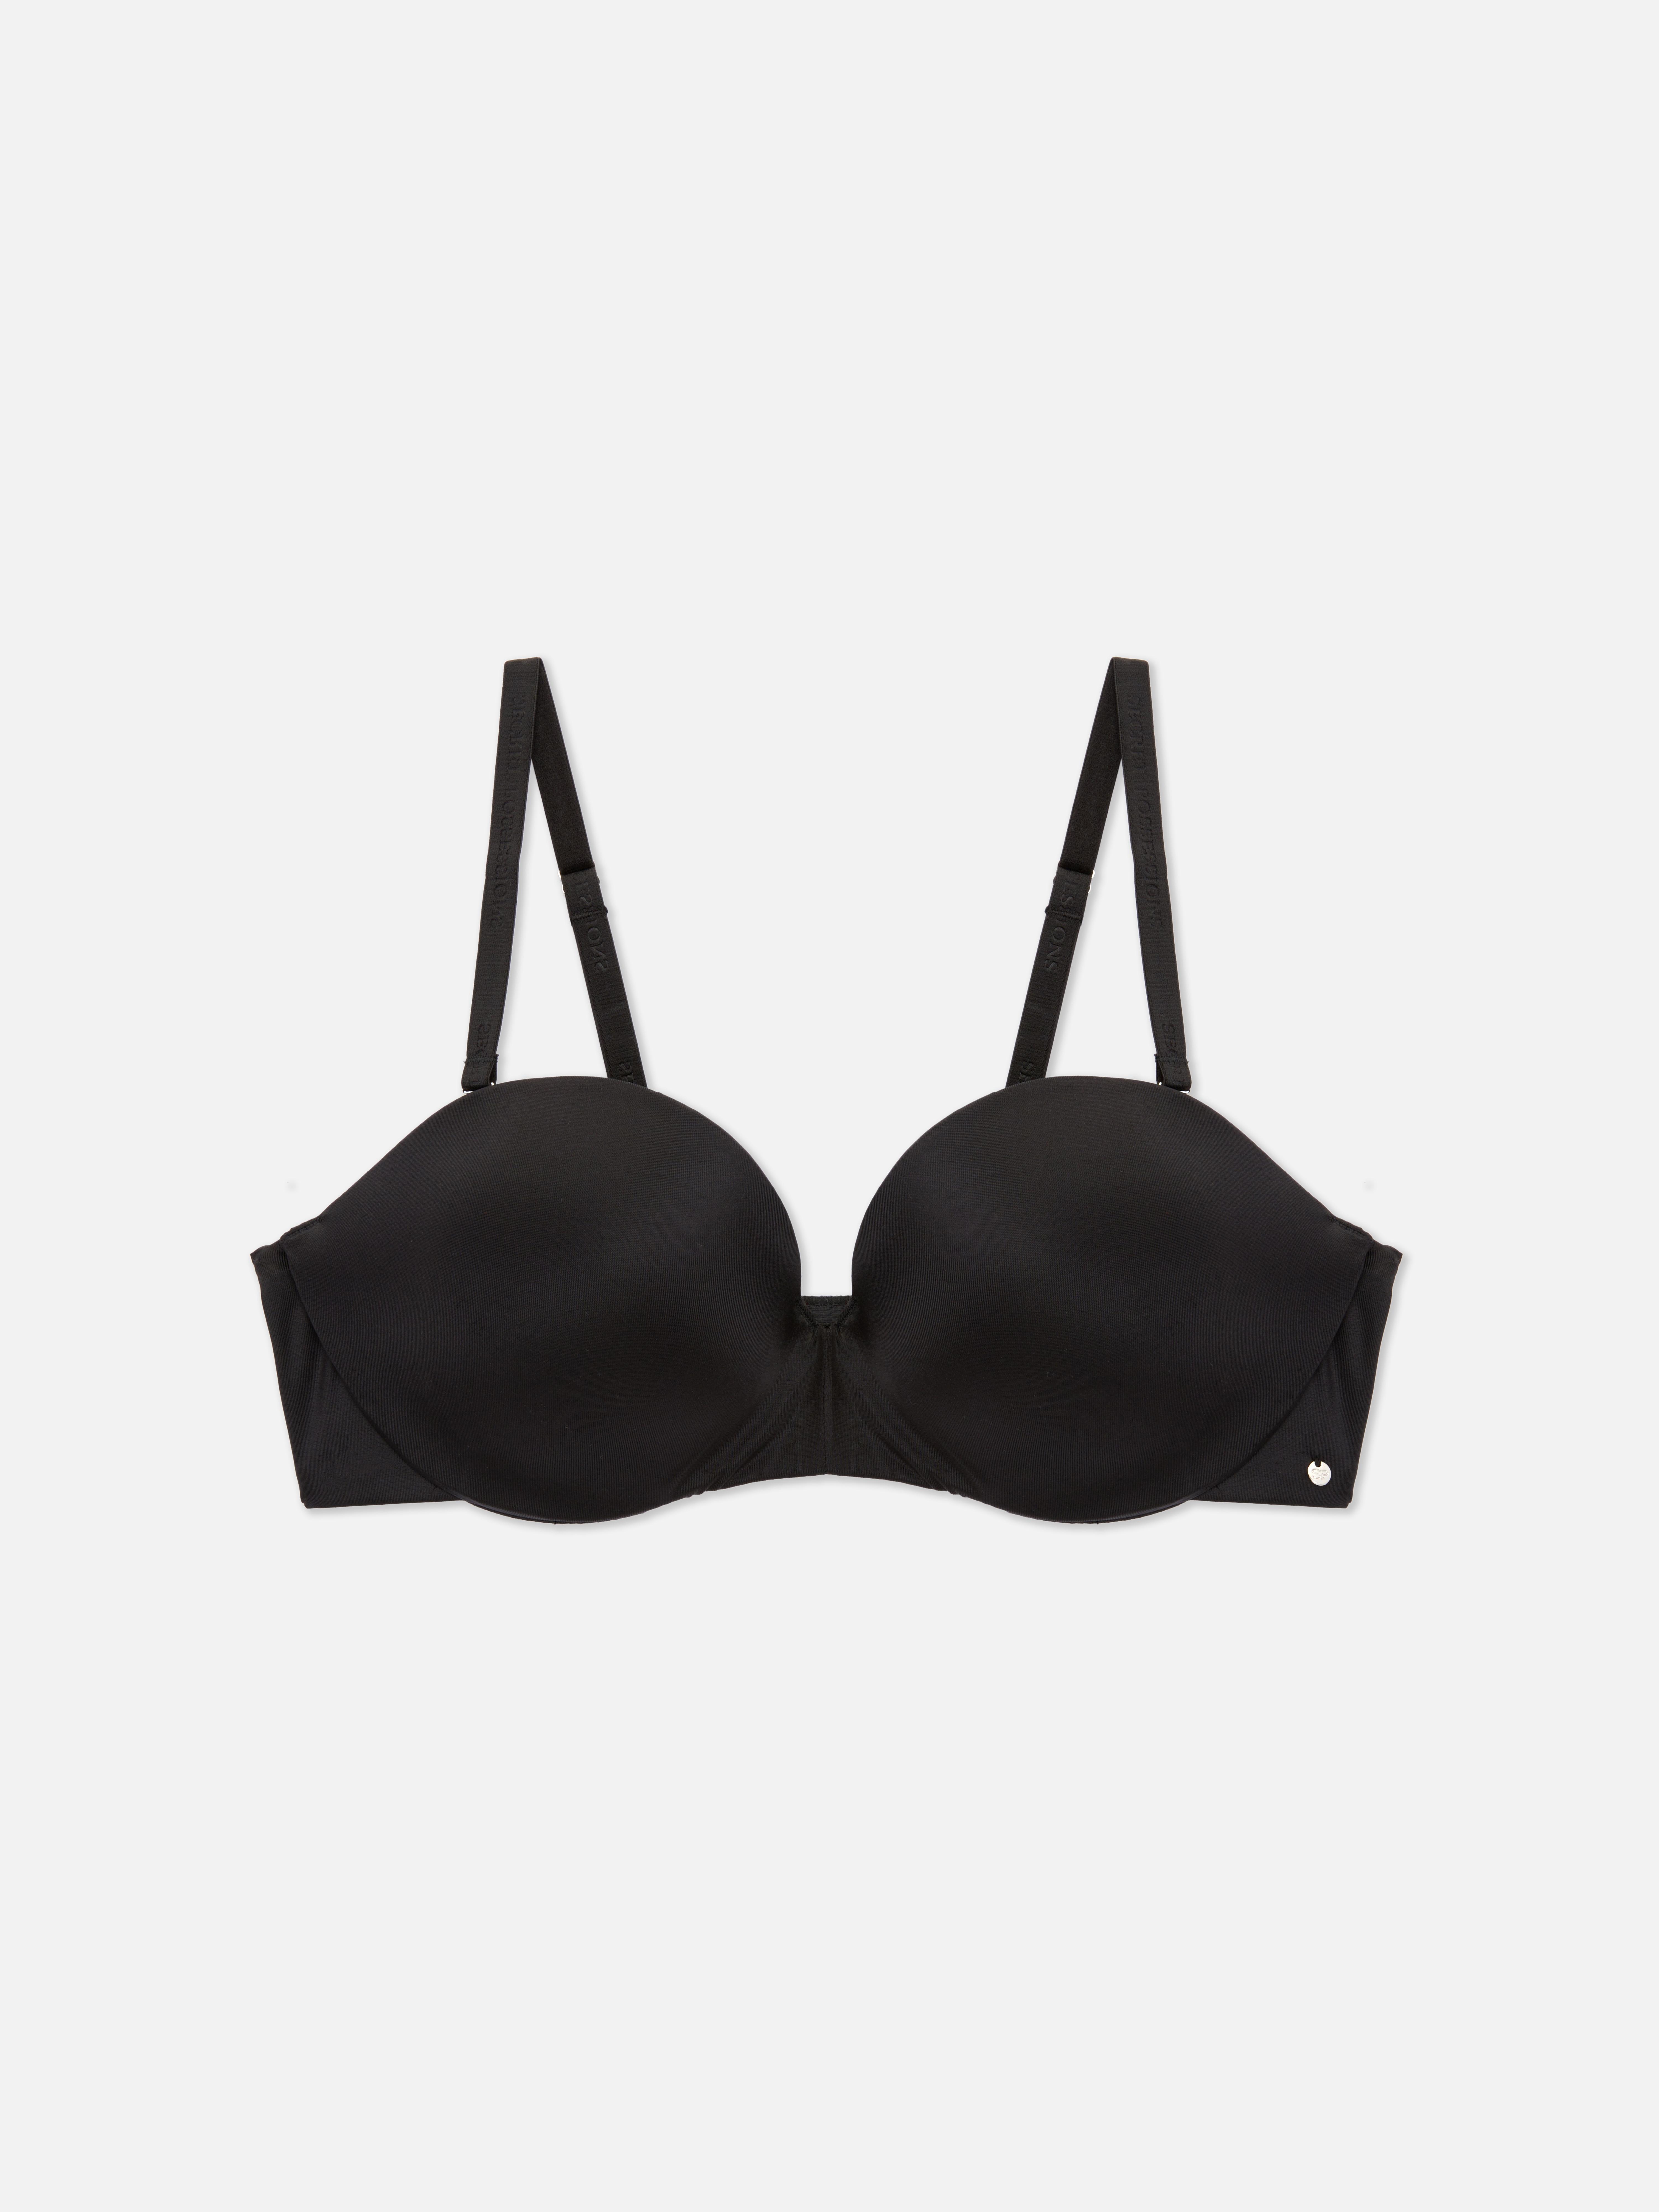 HZMM Primark Shop Online Invisible Lift Sticky Bra for Women